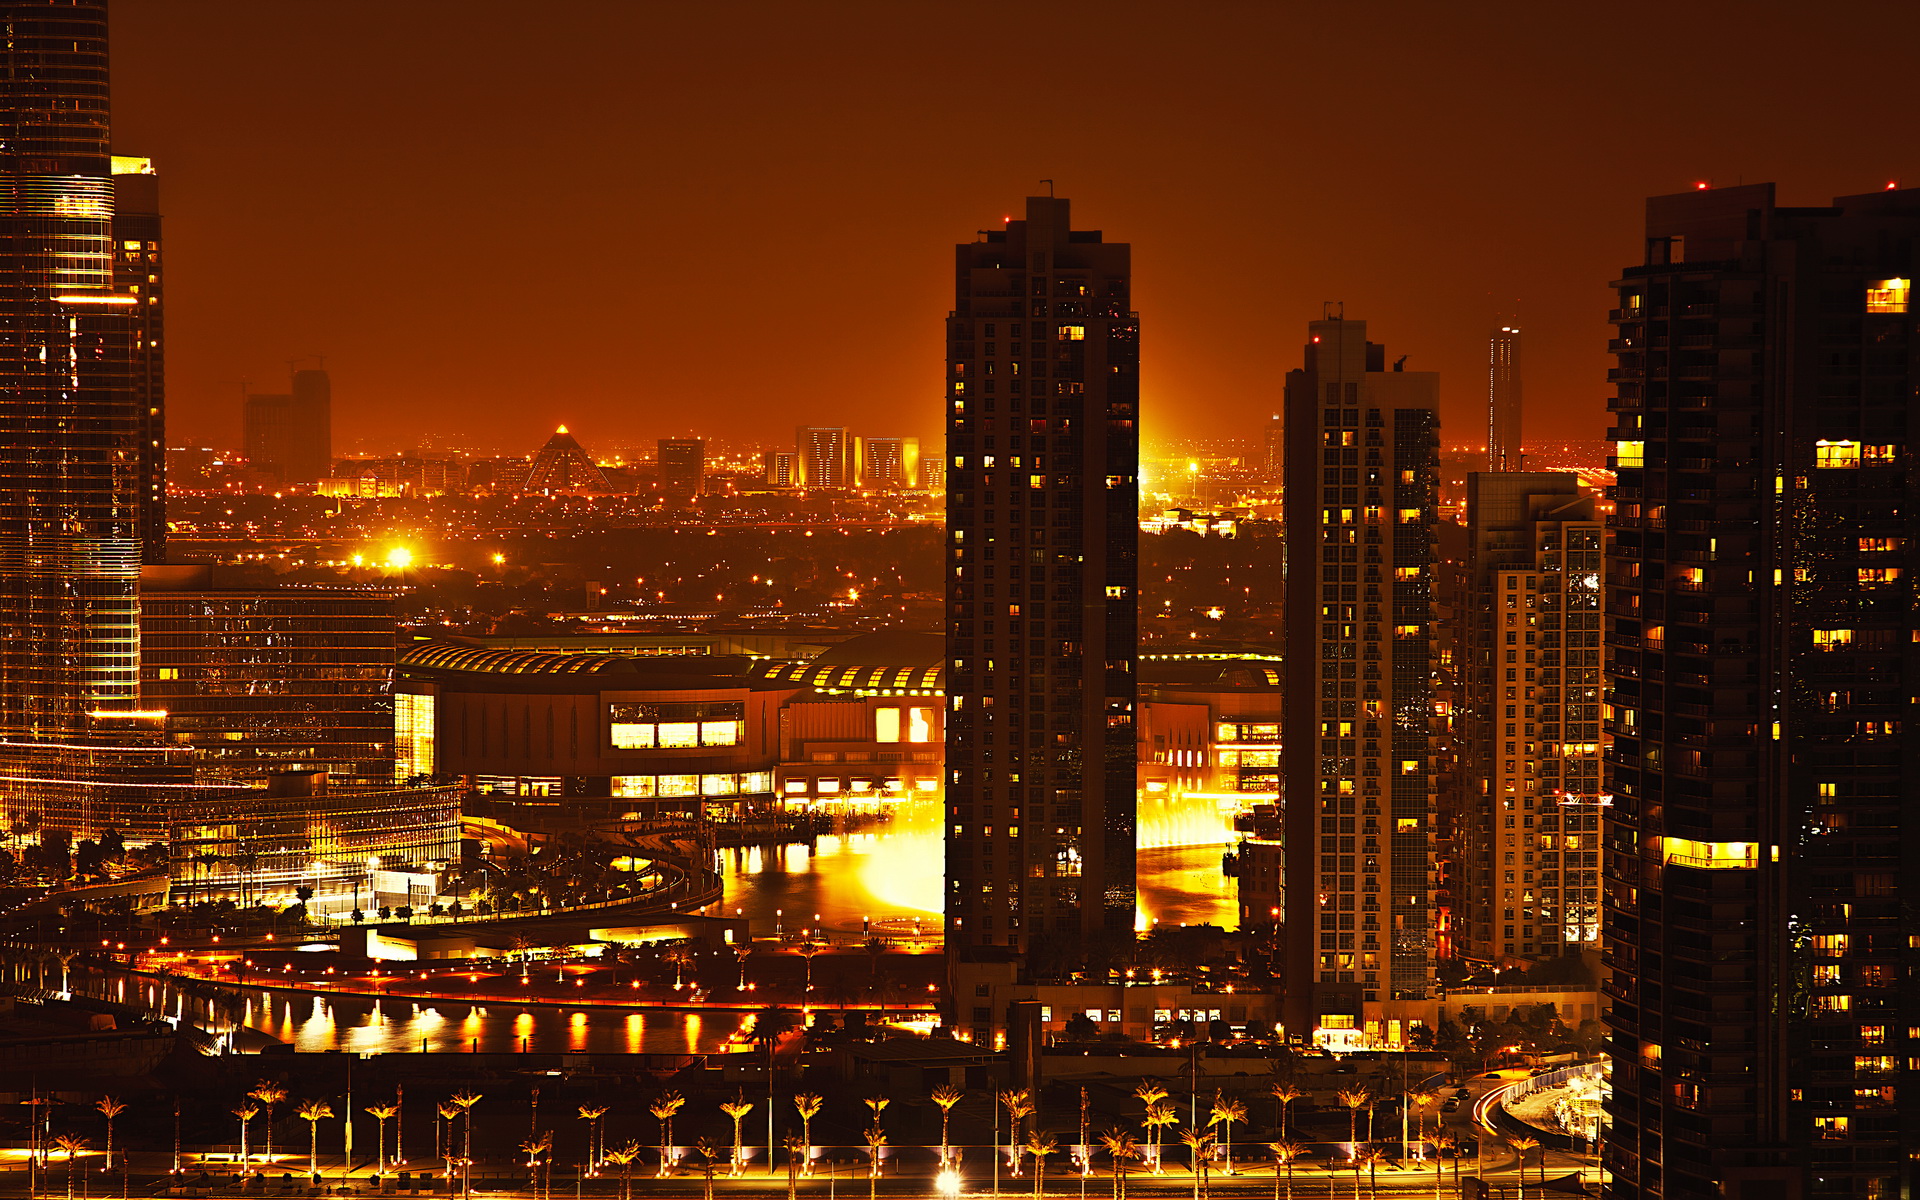 Dubai downtown night scene with city lights, luxury new high tech town in middle East, United Arab Emirates architecture